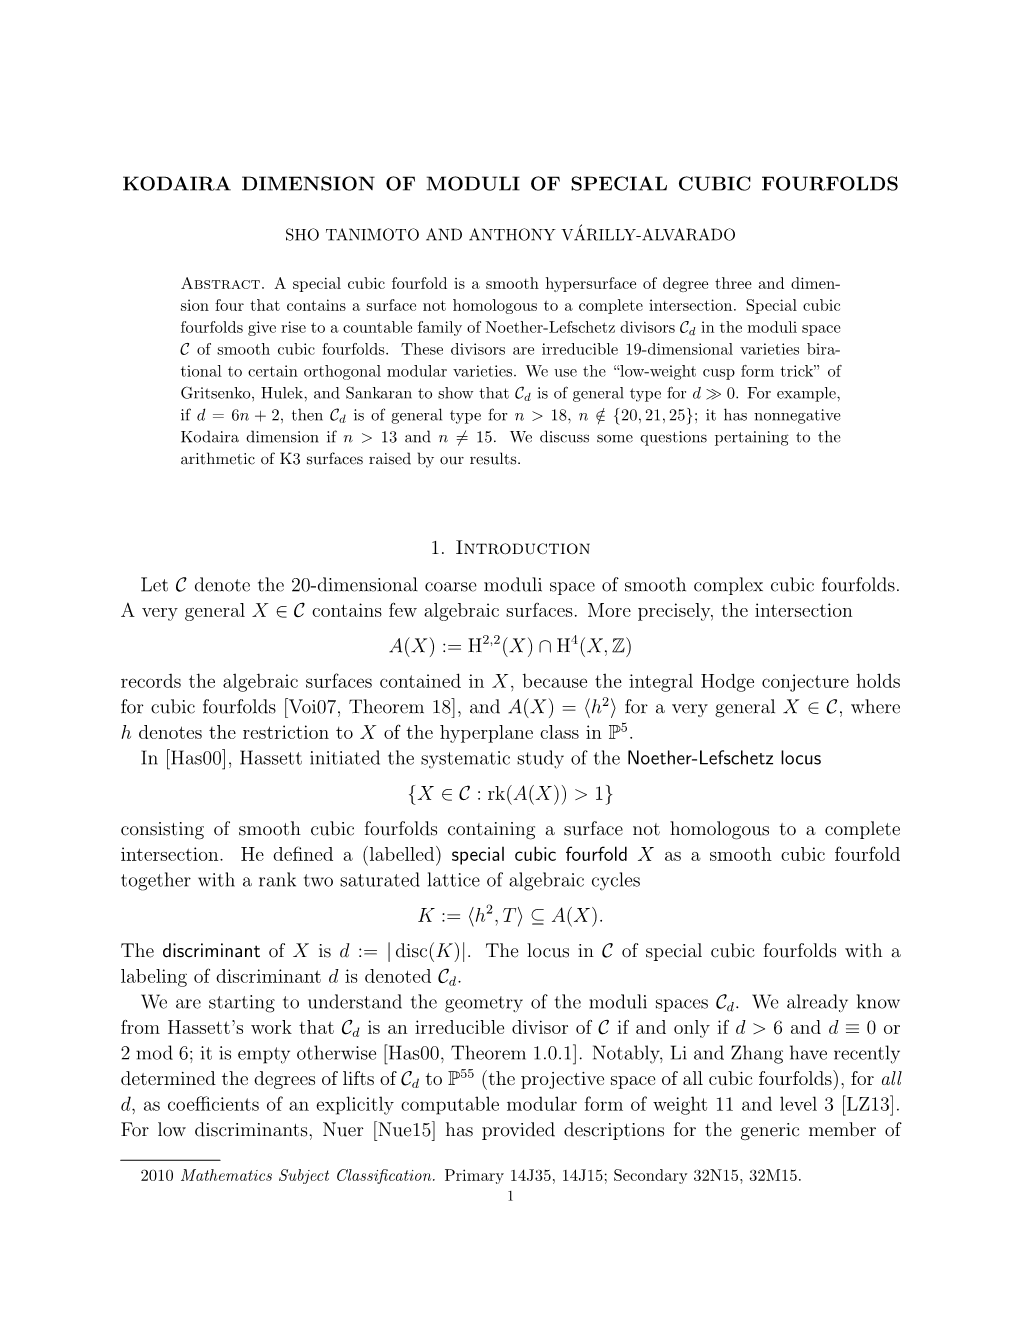 Kodaira Dimension of Moduli of Special Cubic Fourfolds